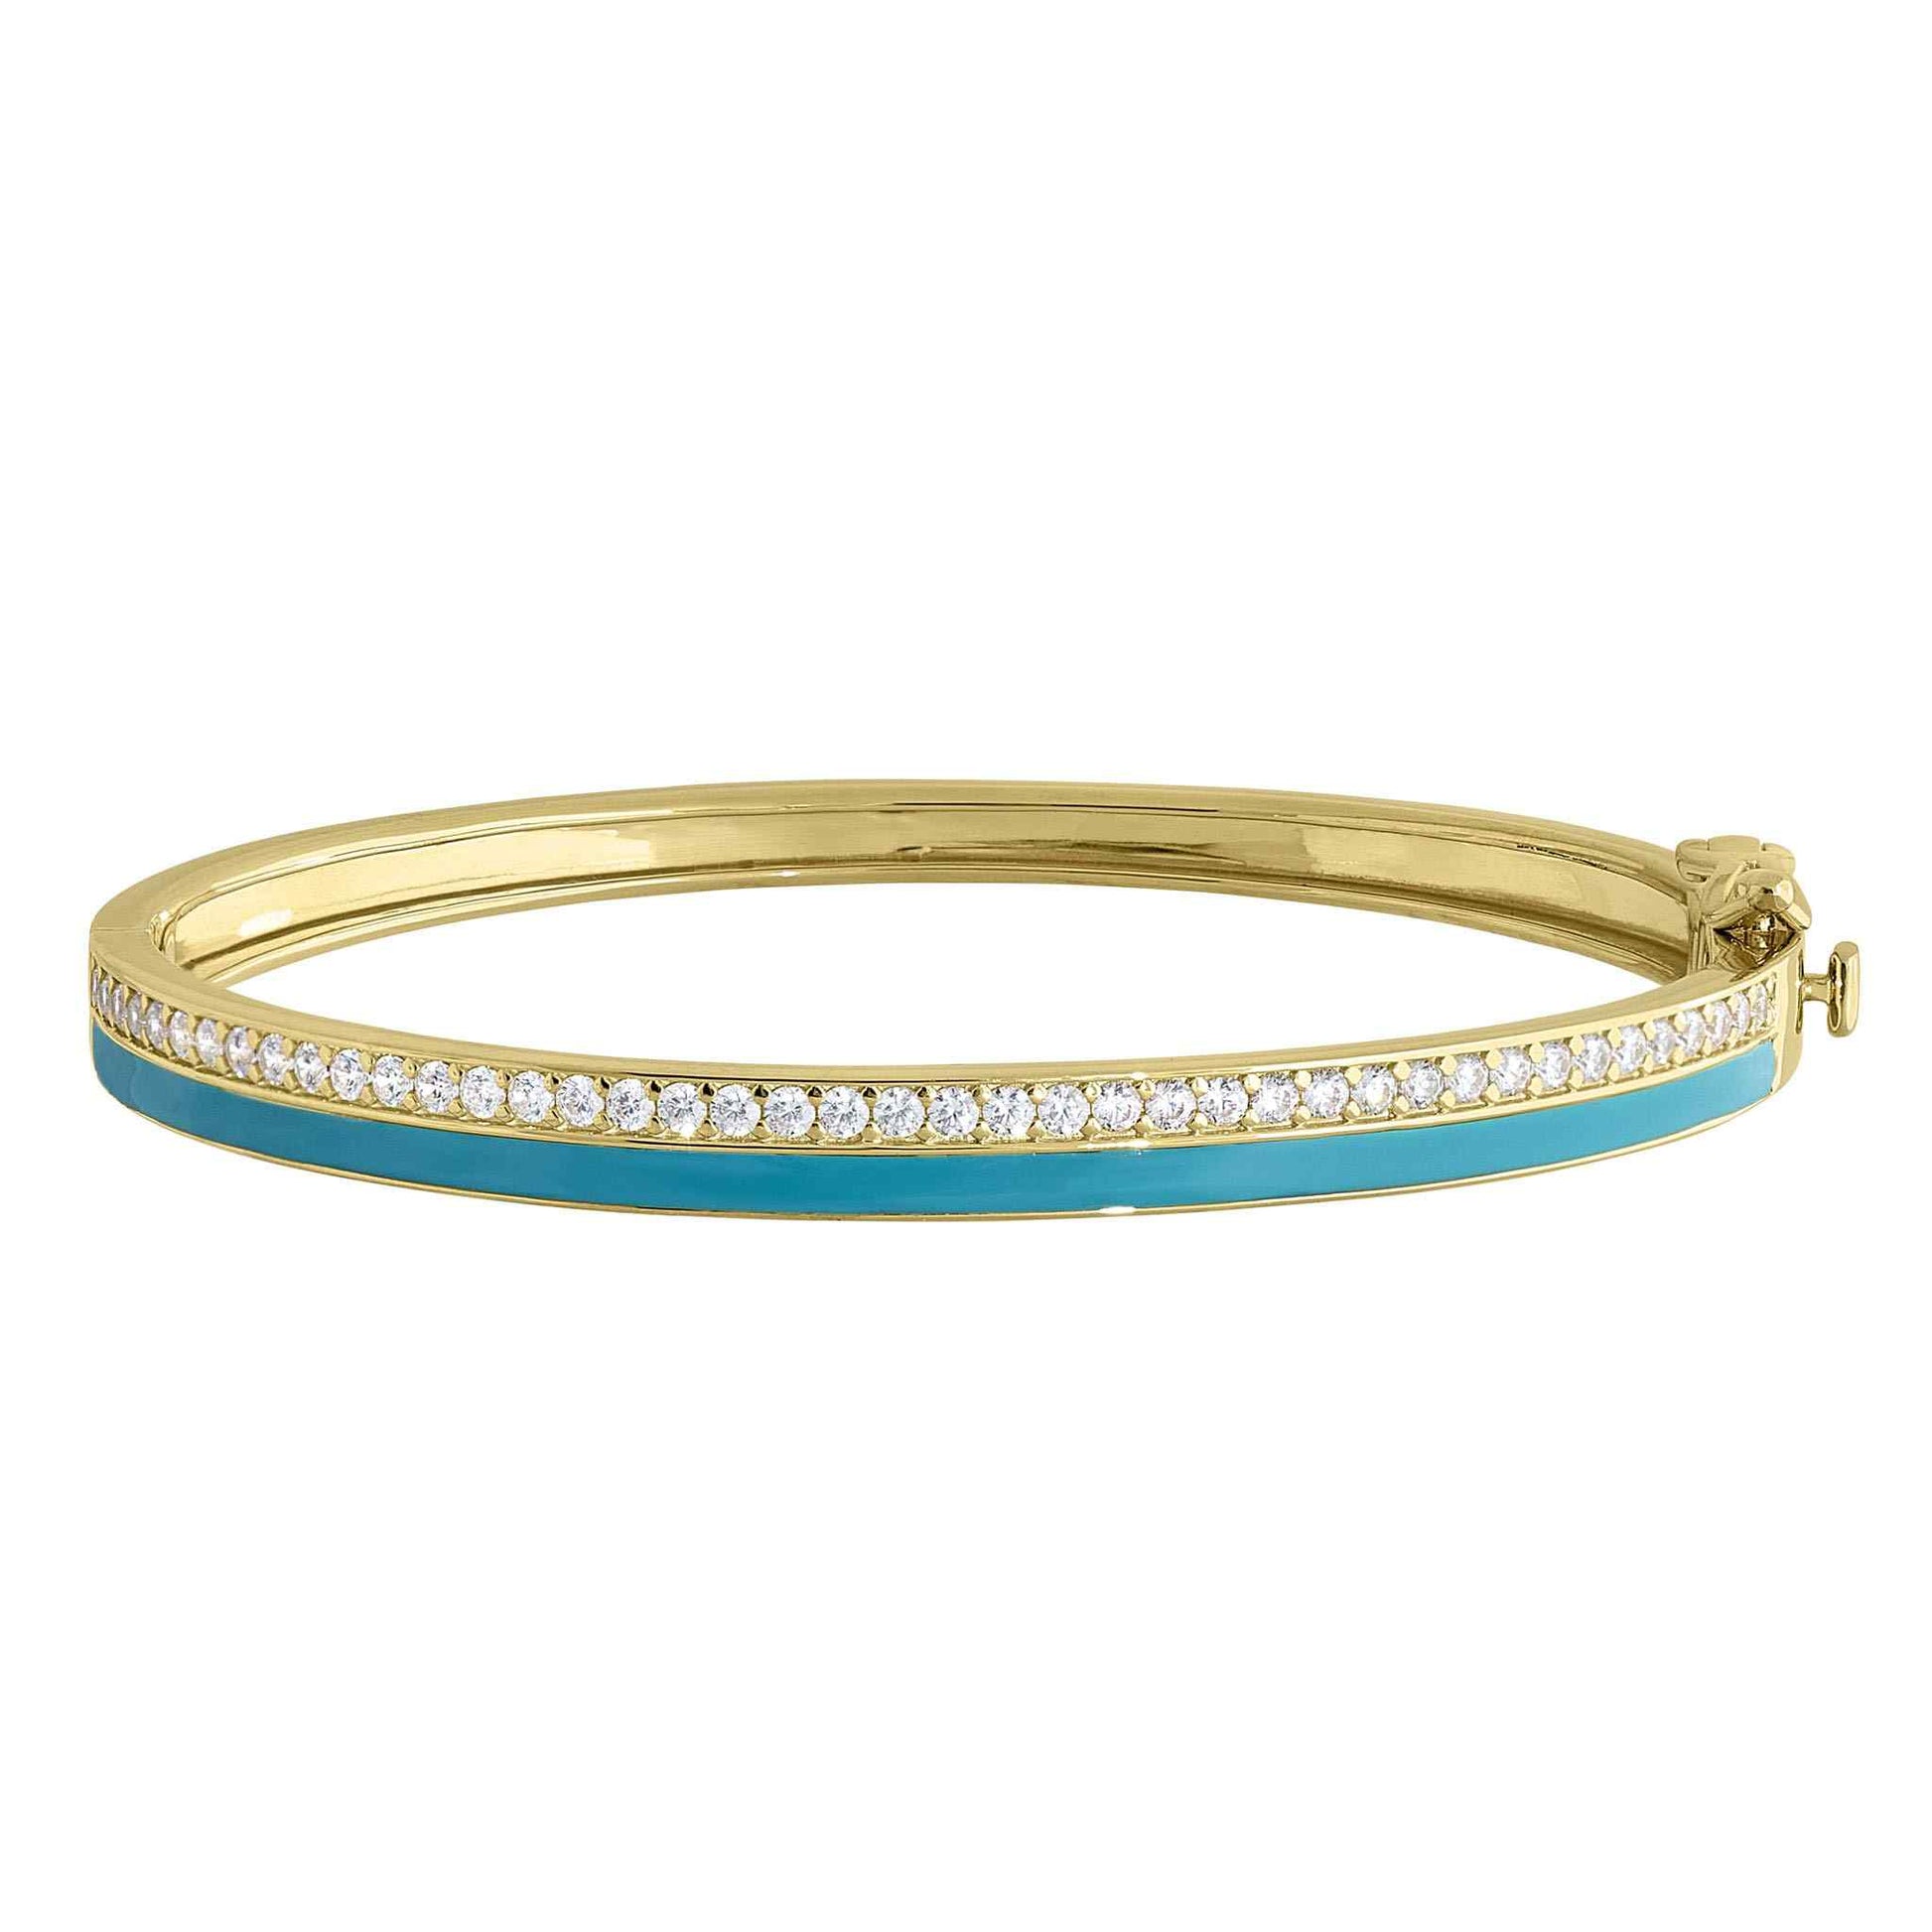 A enamel hinged bangle bracelet with simulated diamonds displayed on a neutral white background.